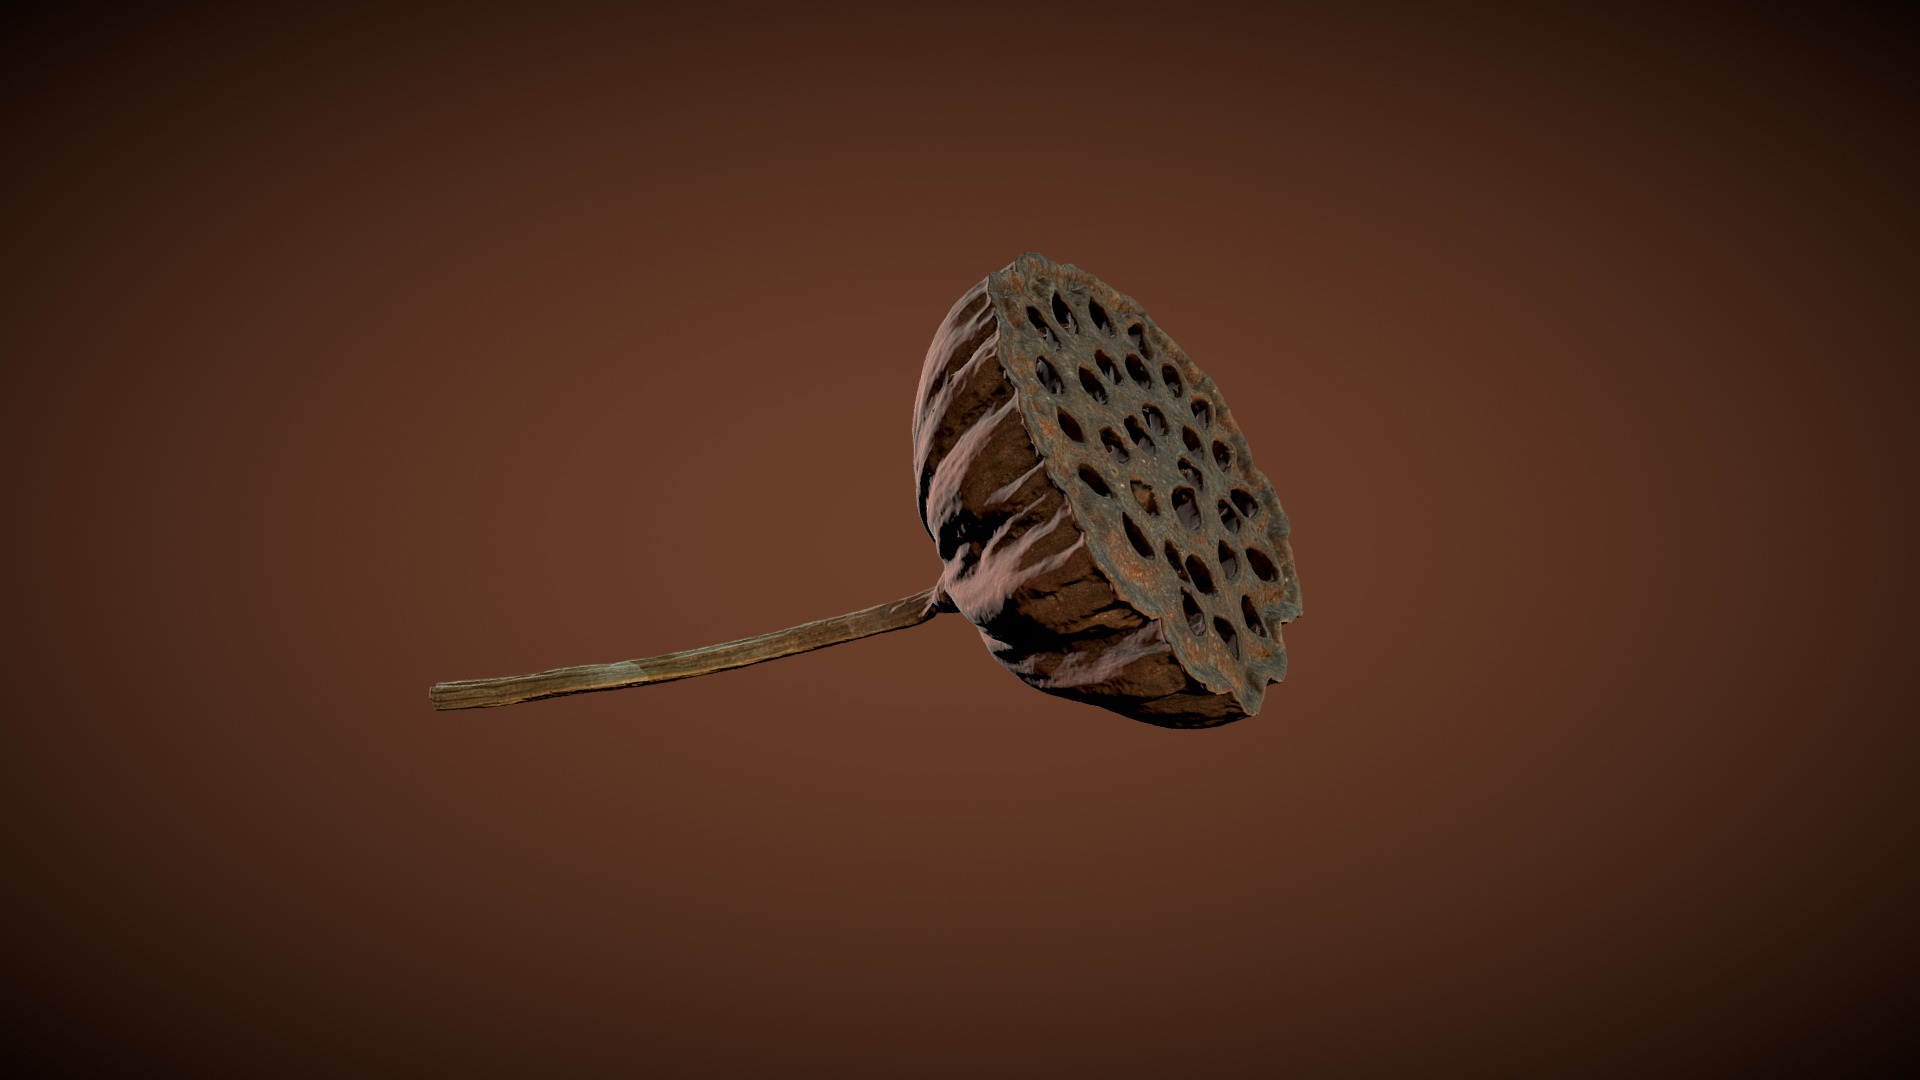 3D model Lotus seed pod - This is a 3D model of the Lotus seed pod. The 3D model is about a black and white spotted butterfly.